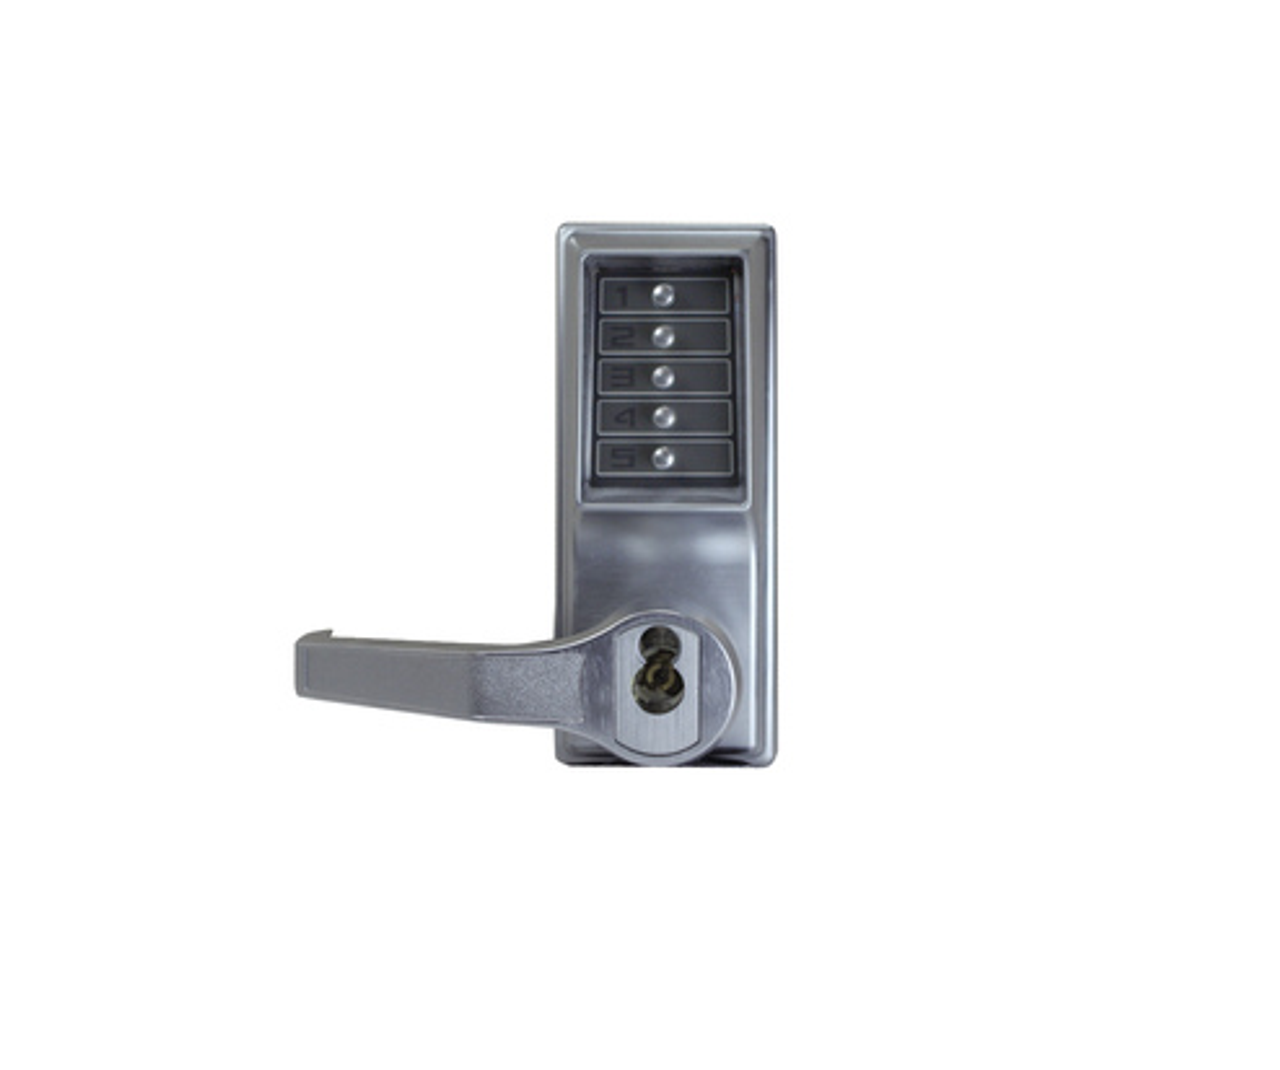 Kaba Simplex LL1041B Pushbutton Lock, W/ Passage And Key Override, Accepts  SFIC, LH  LHR Doors